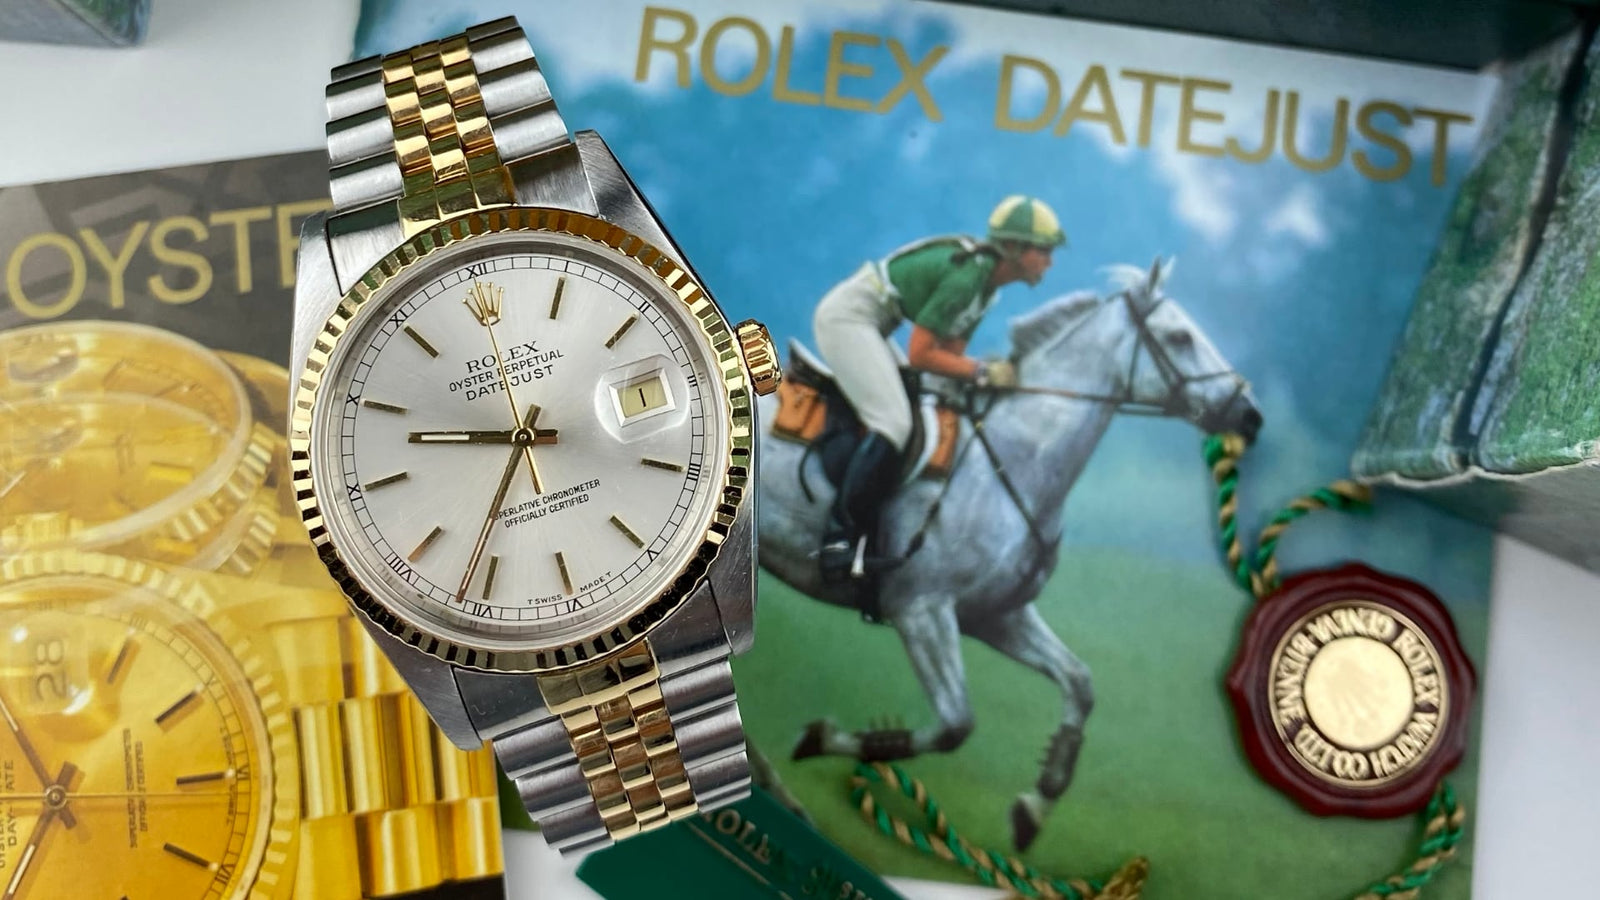 Should I Buy Used Watches Online or In-Person? Pros and Cons